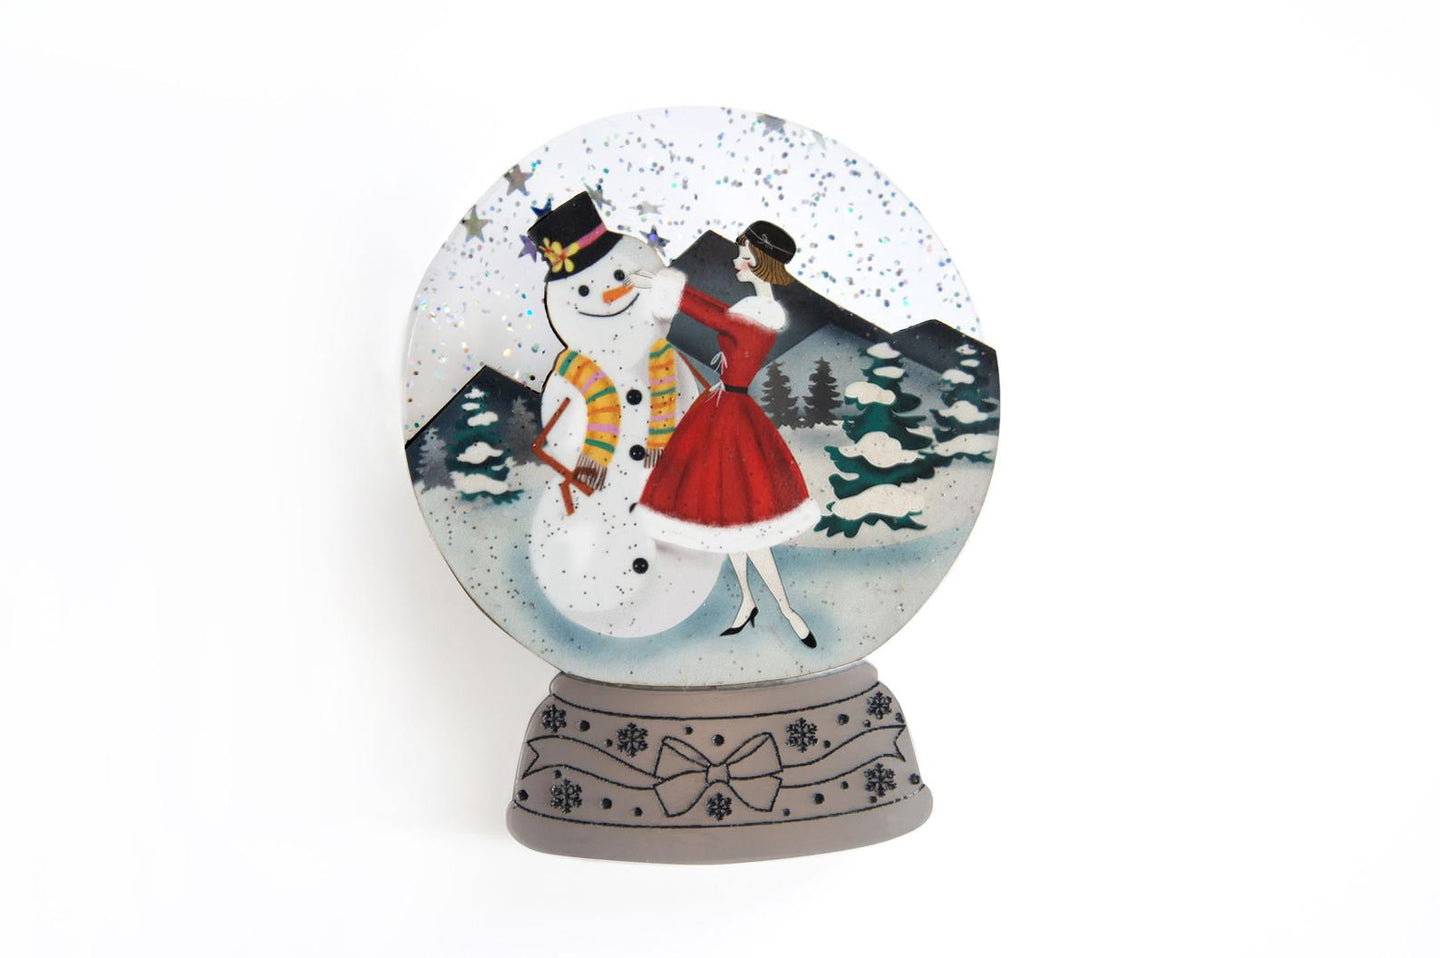 LaliBlue Girl With Snowman Snow Globe brooch quirky fashion retro vintage style